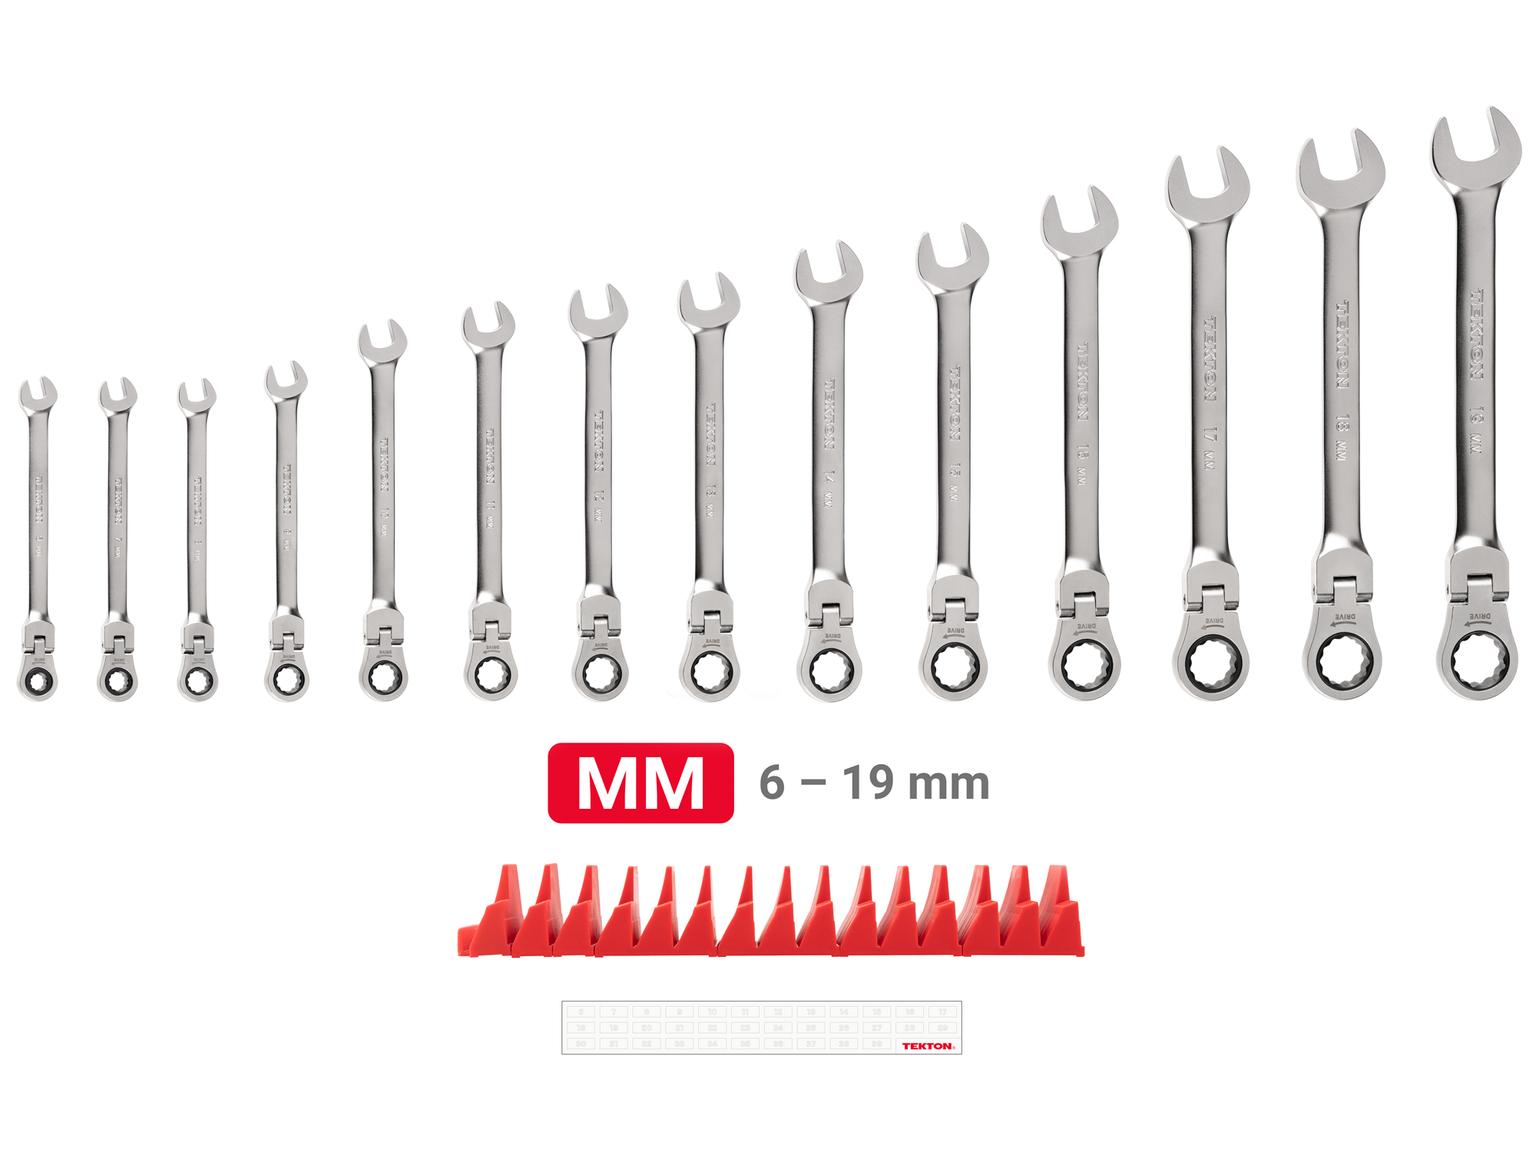 TEKTON WRC95302-T Flex Head 12-Point Ratcheting Combination Wrench Set with Modular Slotted Organizer, 14-Piece (6-19 mm)